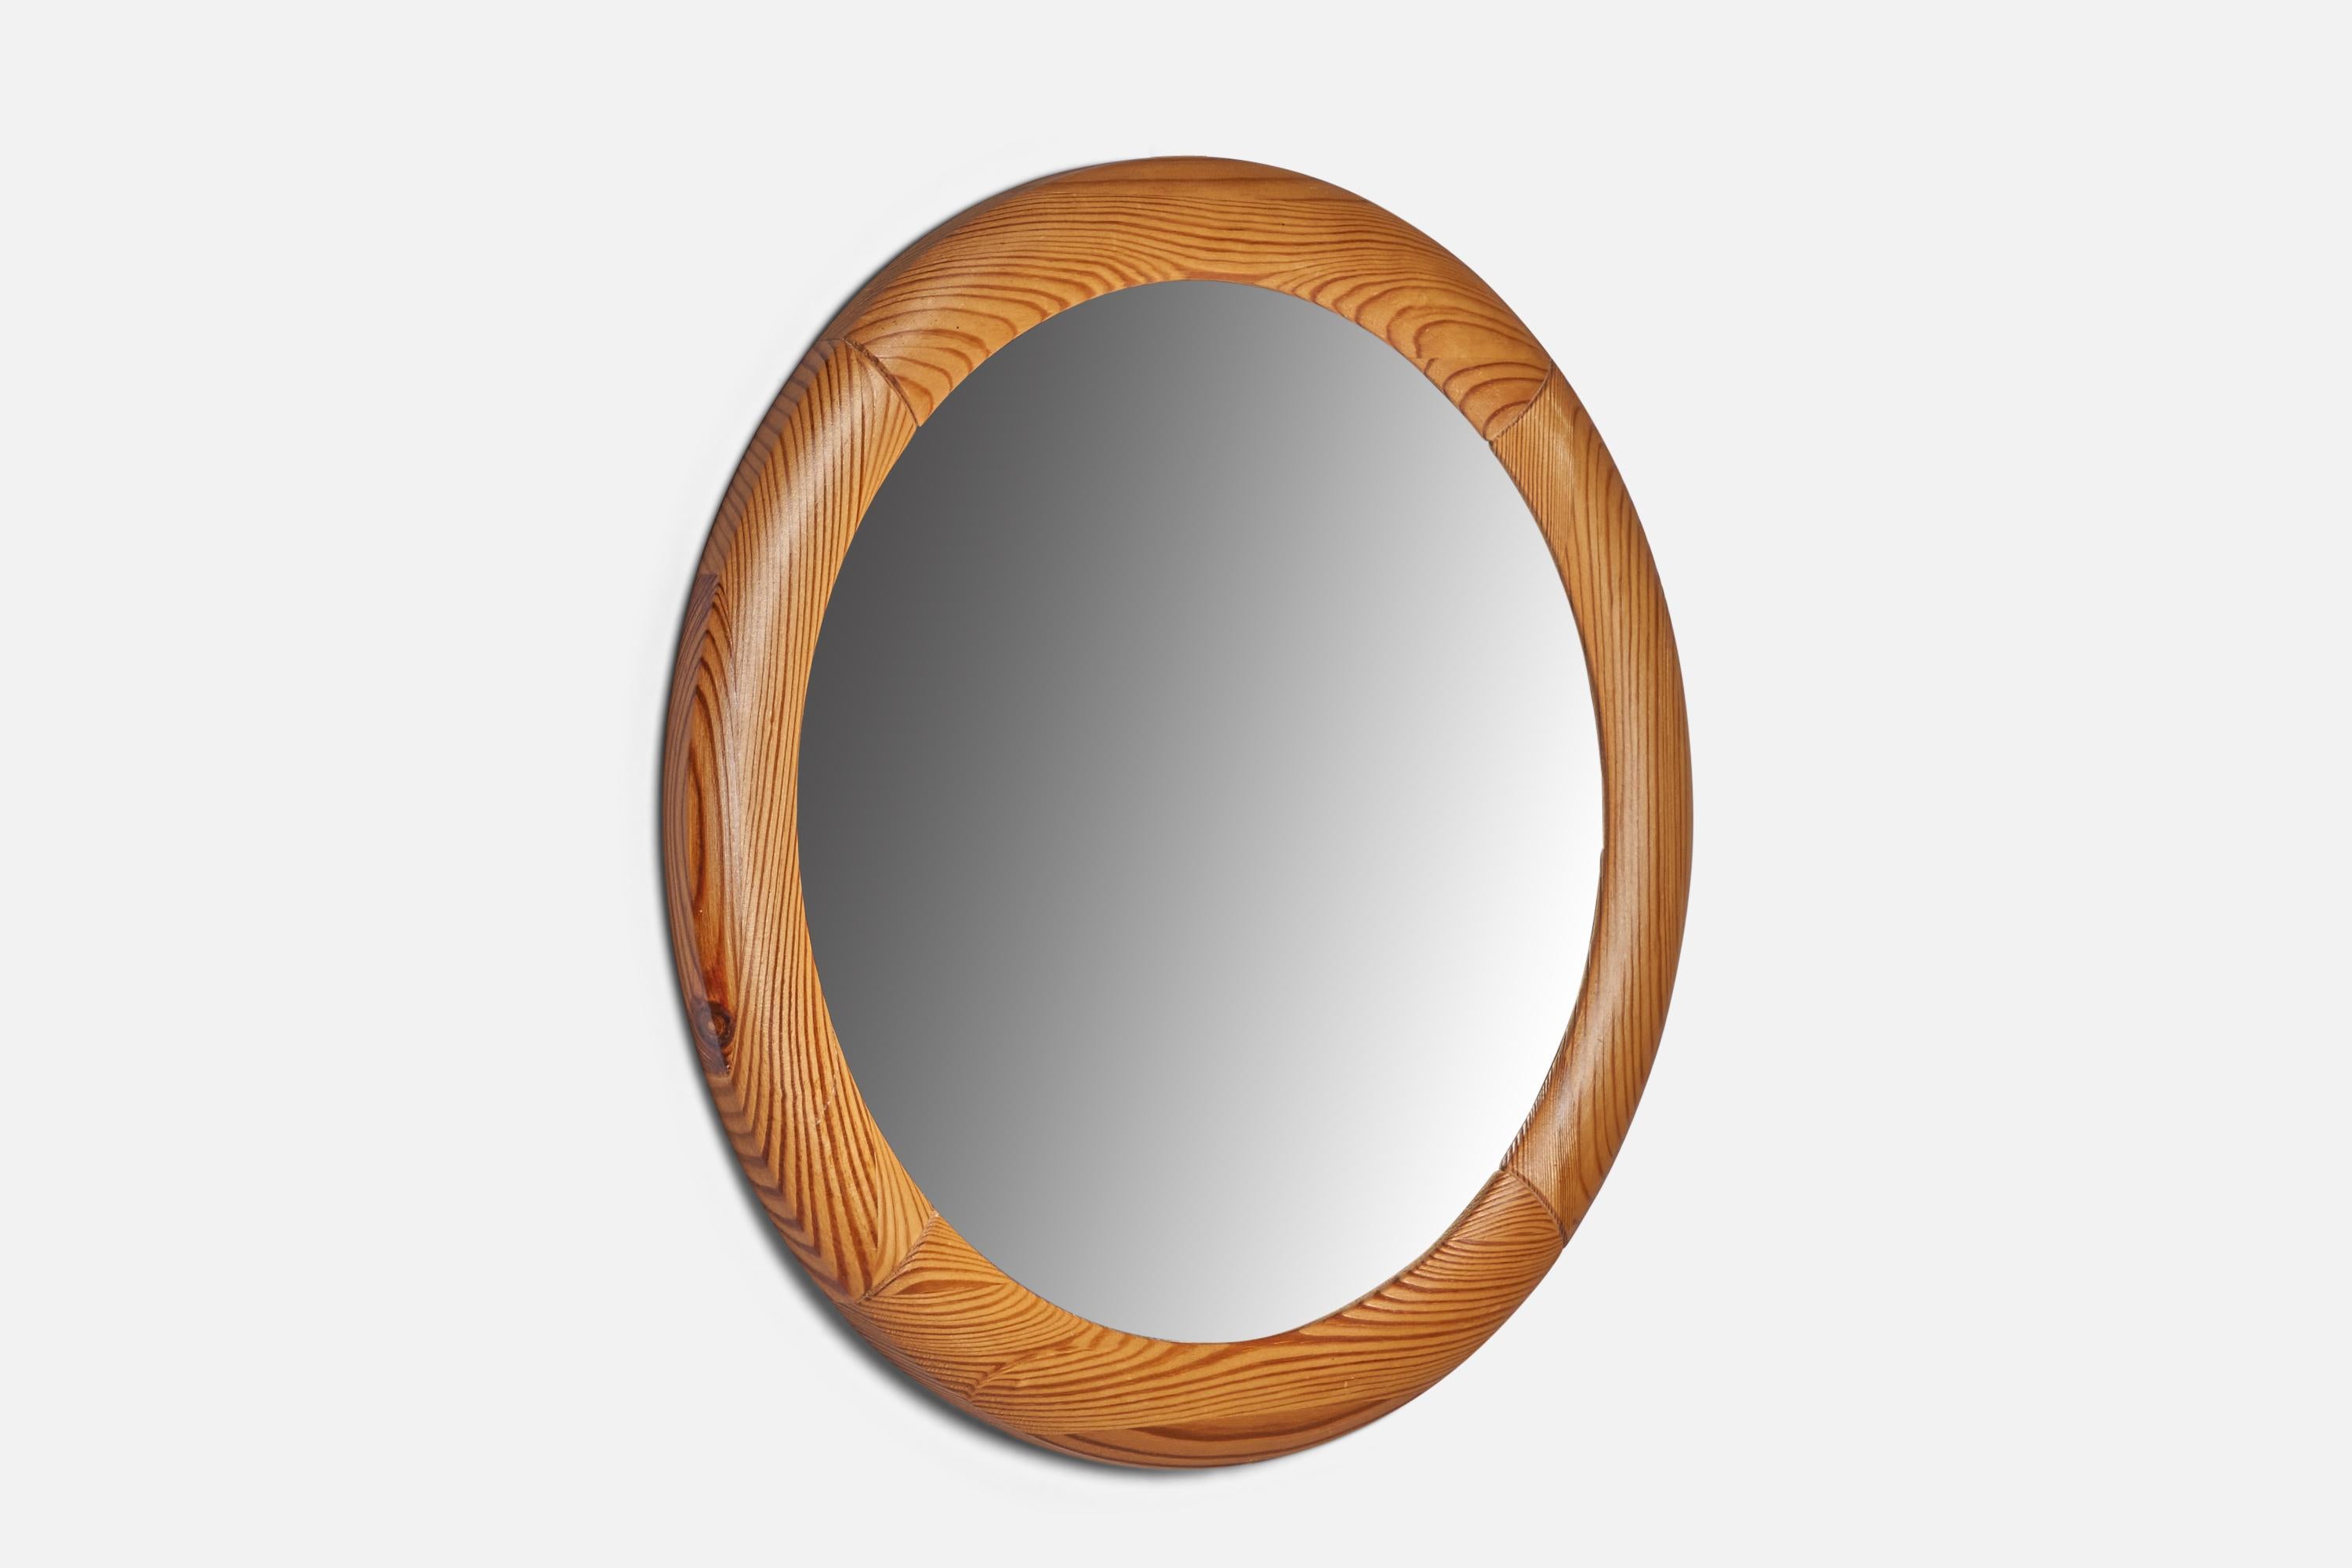 A round pine wall mirror designed and produced in Sweden, 1970s.